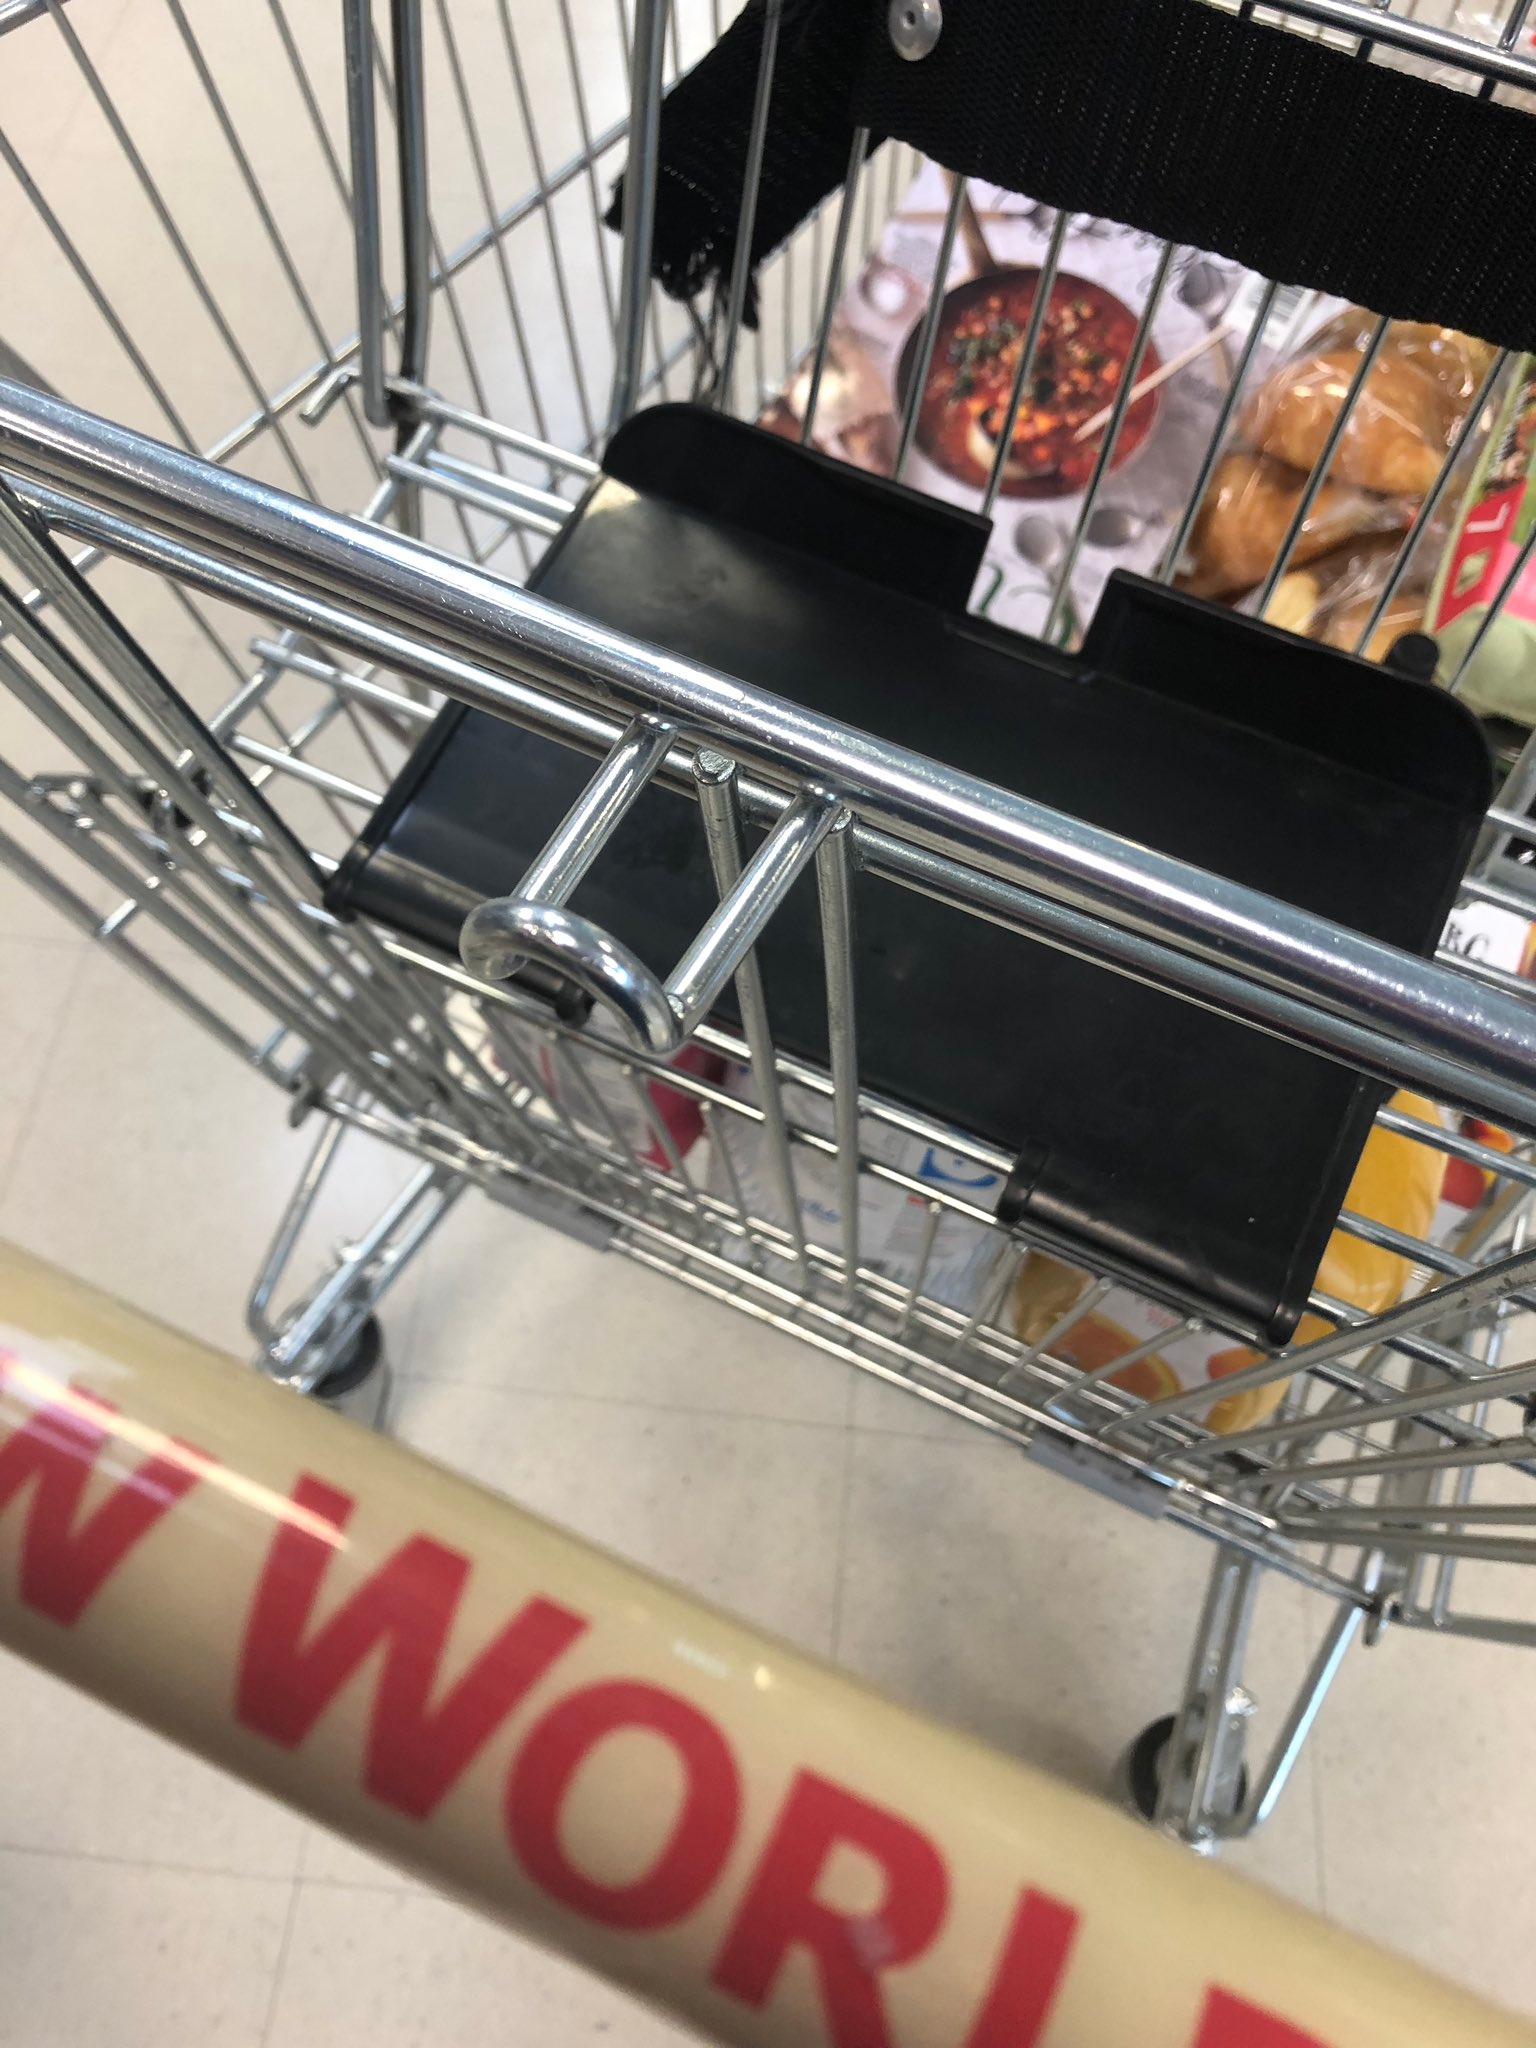 A lot of people did not even know about the hook on a trolley. Credit: @BeeFaerie/ Twitter